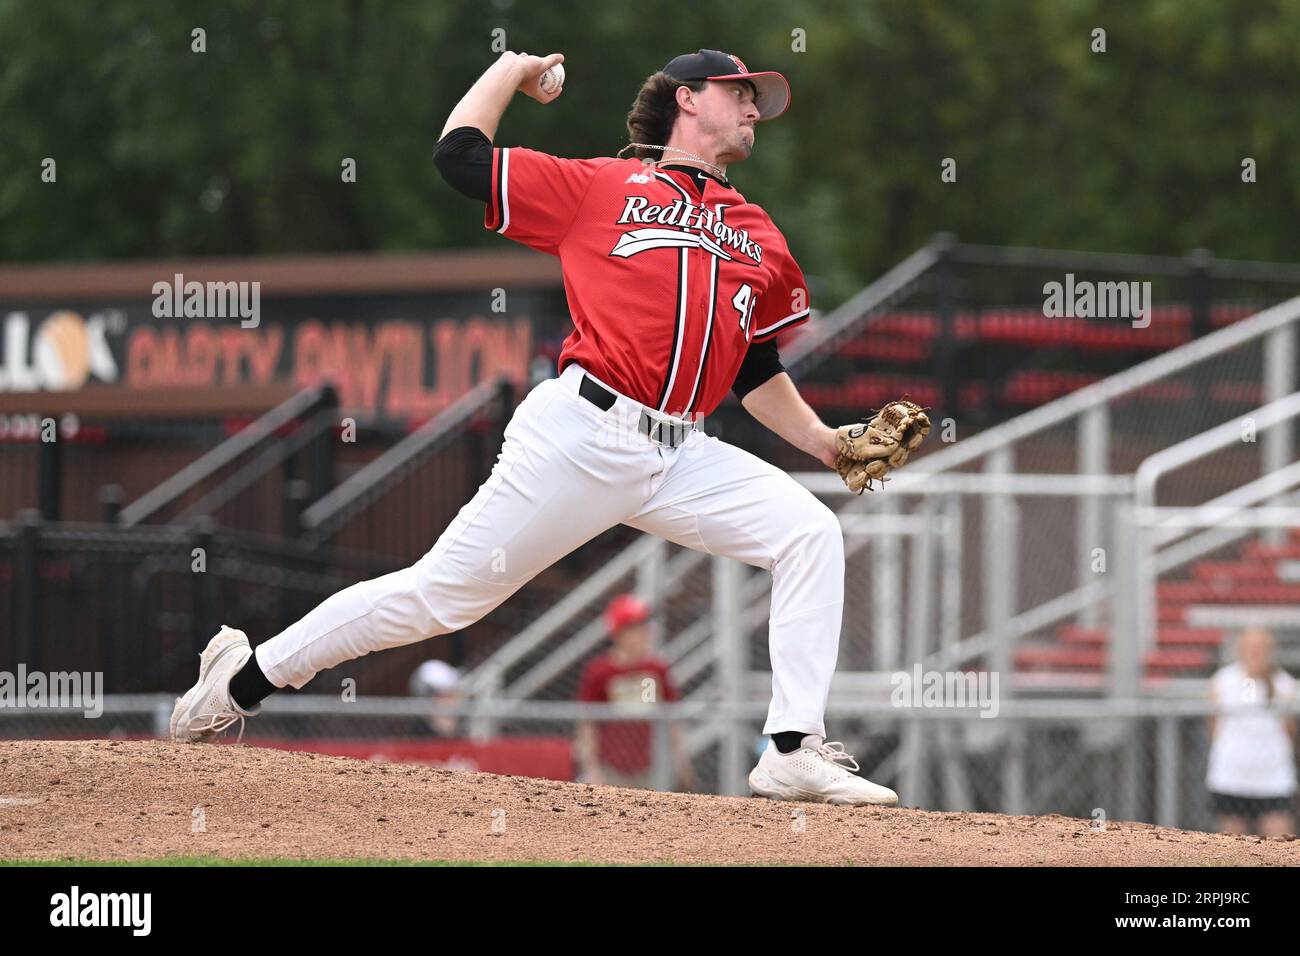 FM RedHawks pitcher Tristen Roehrich (40) delivers a pitch during the FM Redhawks game against the Winnipeg Goldeyes in American Association professional baseball at Newman Outdoor Field in Fargo, ND on Sunday, September 4, 2023. Winnipeg won 7-2. Photo by Russell Hons/CSM. Stock Photo